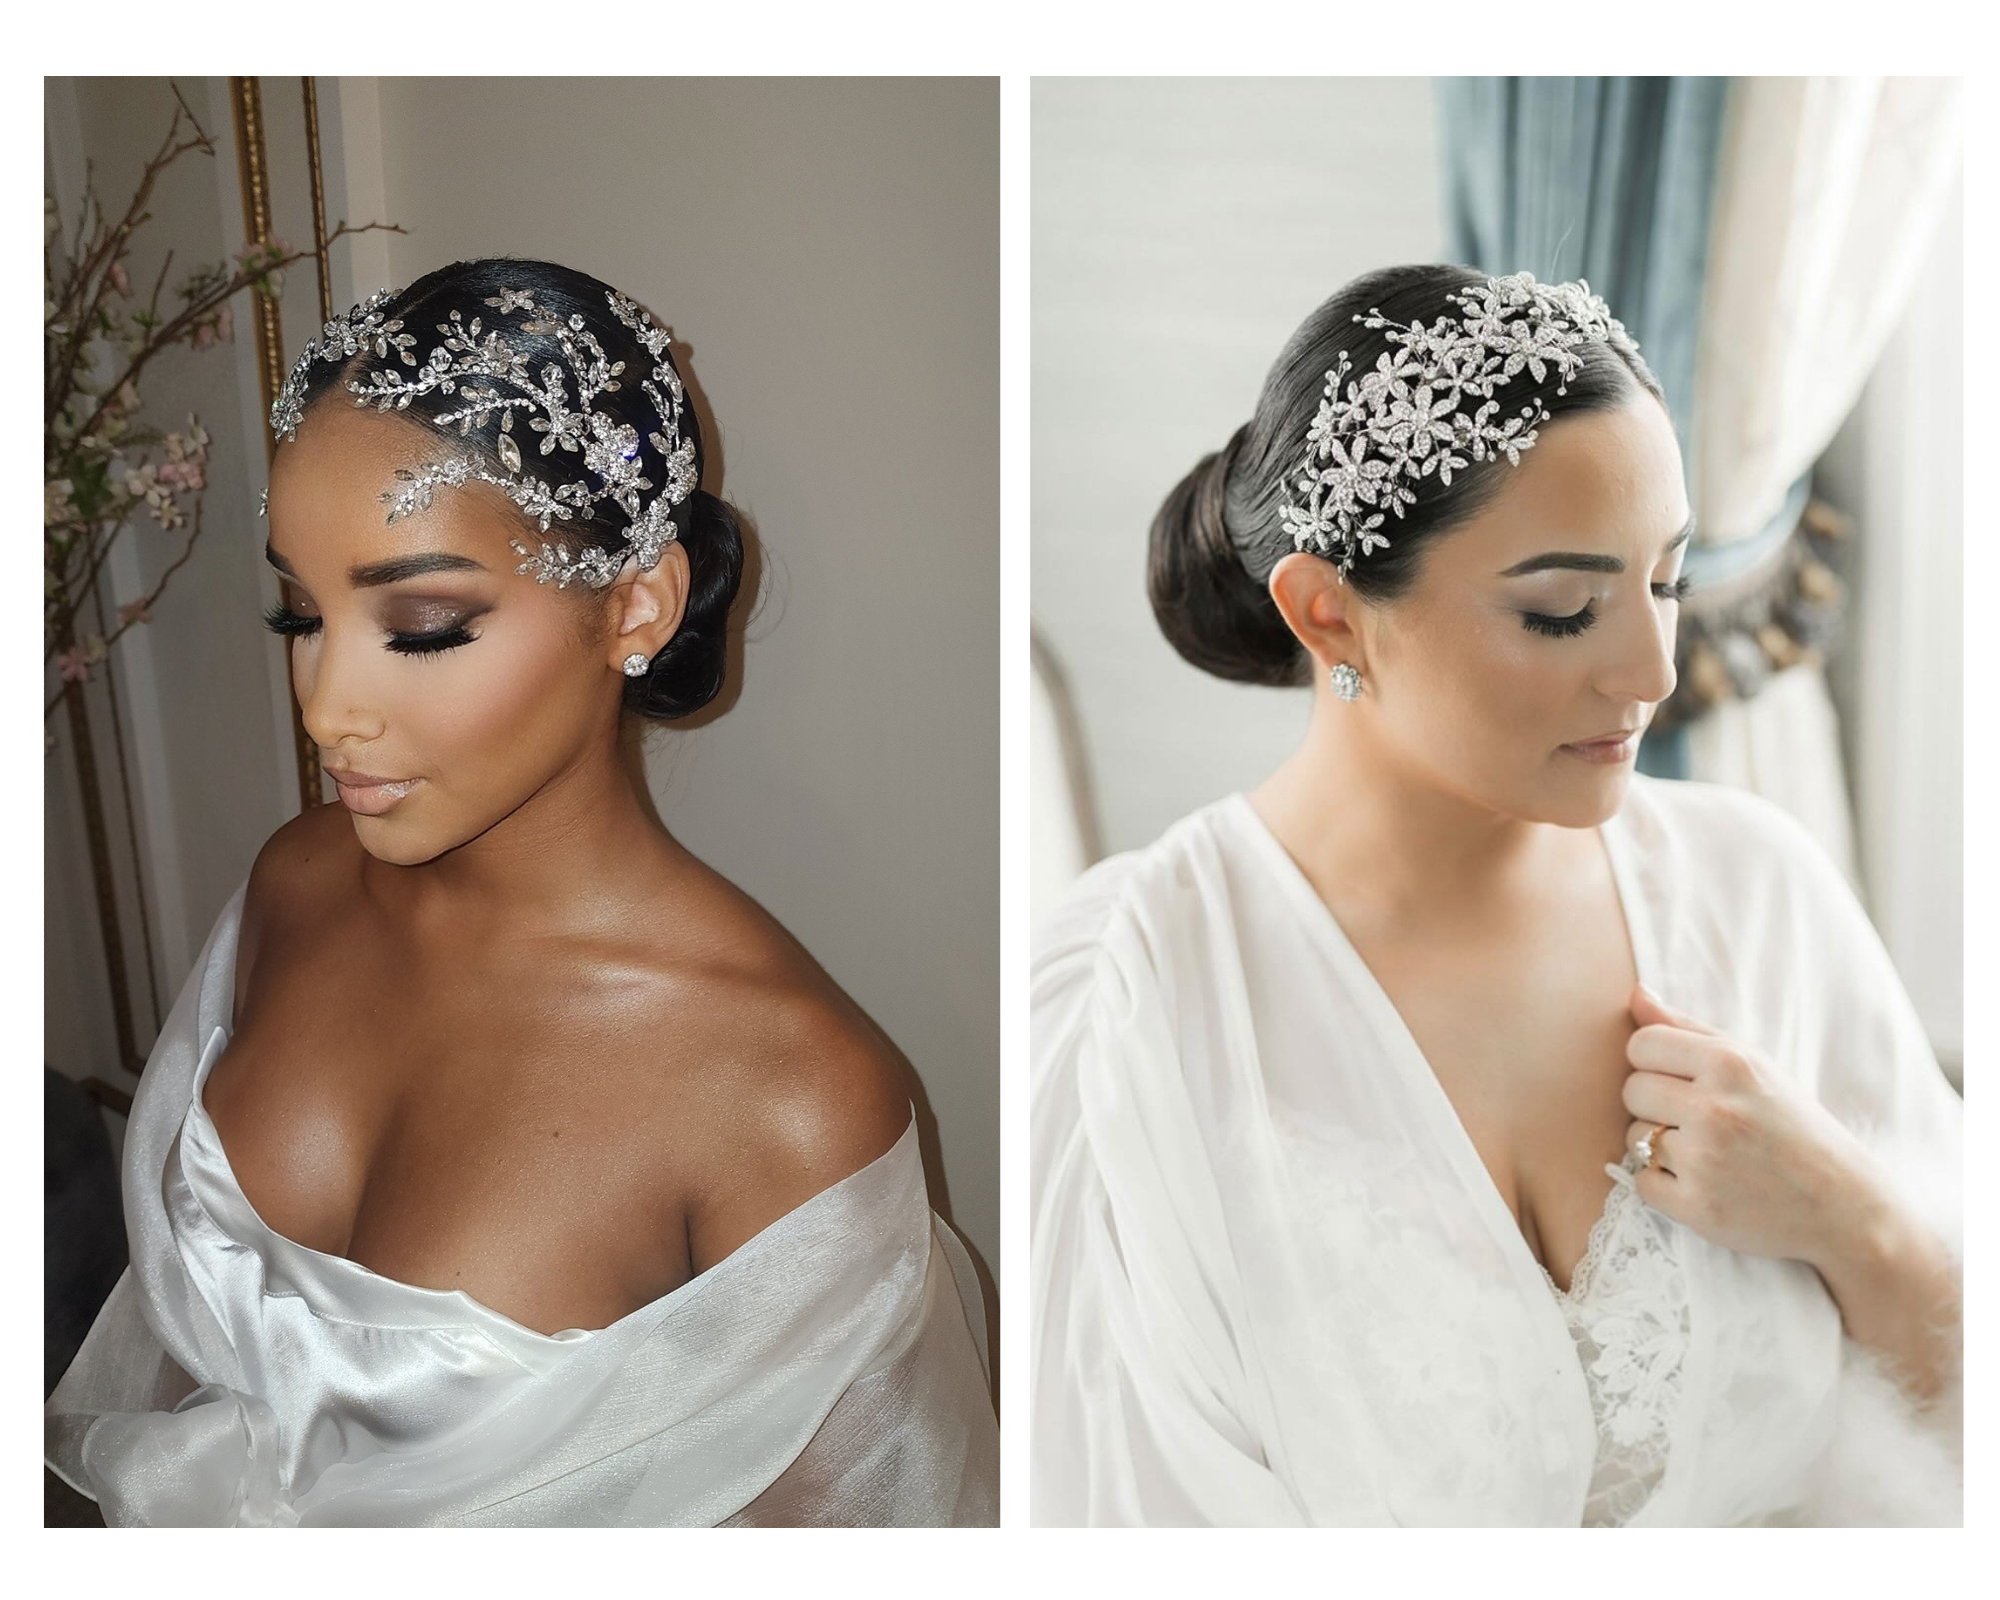 Low bridal buns styled with sparkling crystal hair vines that frame the face.